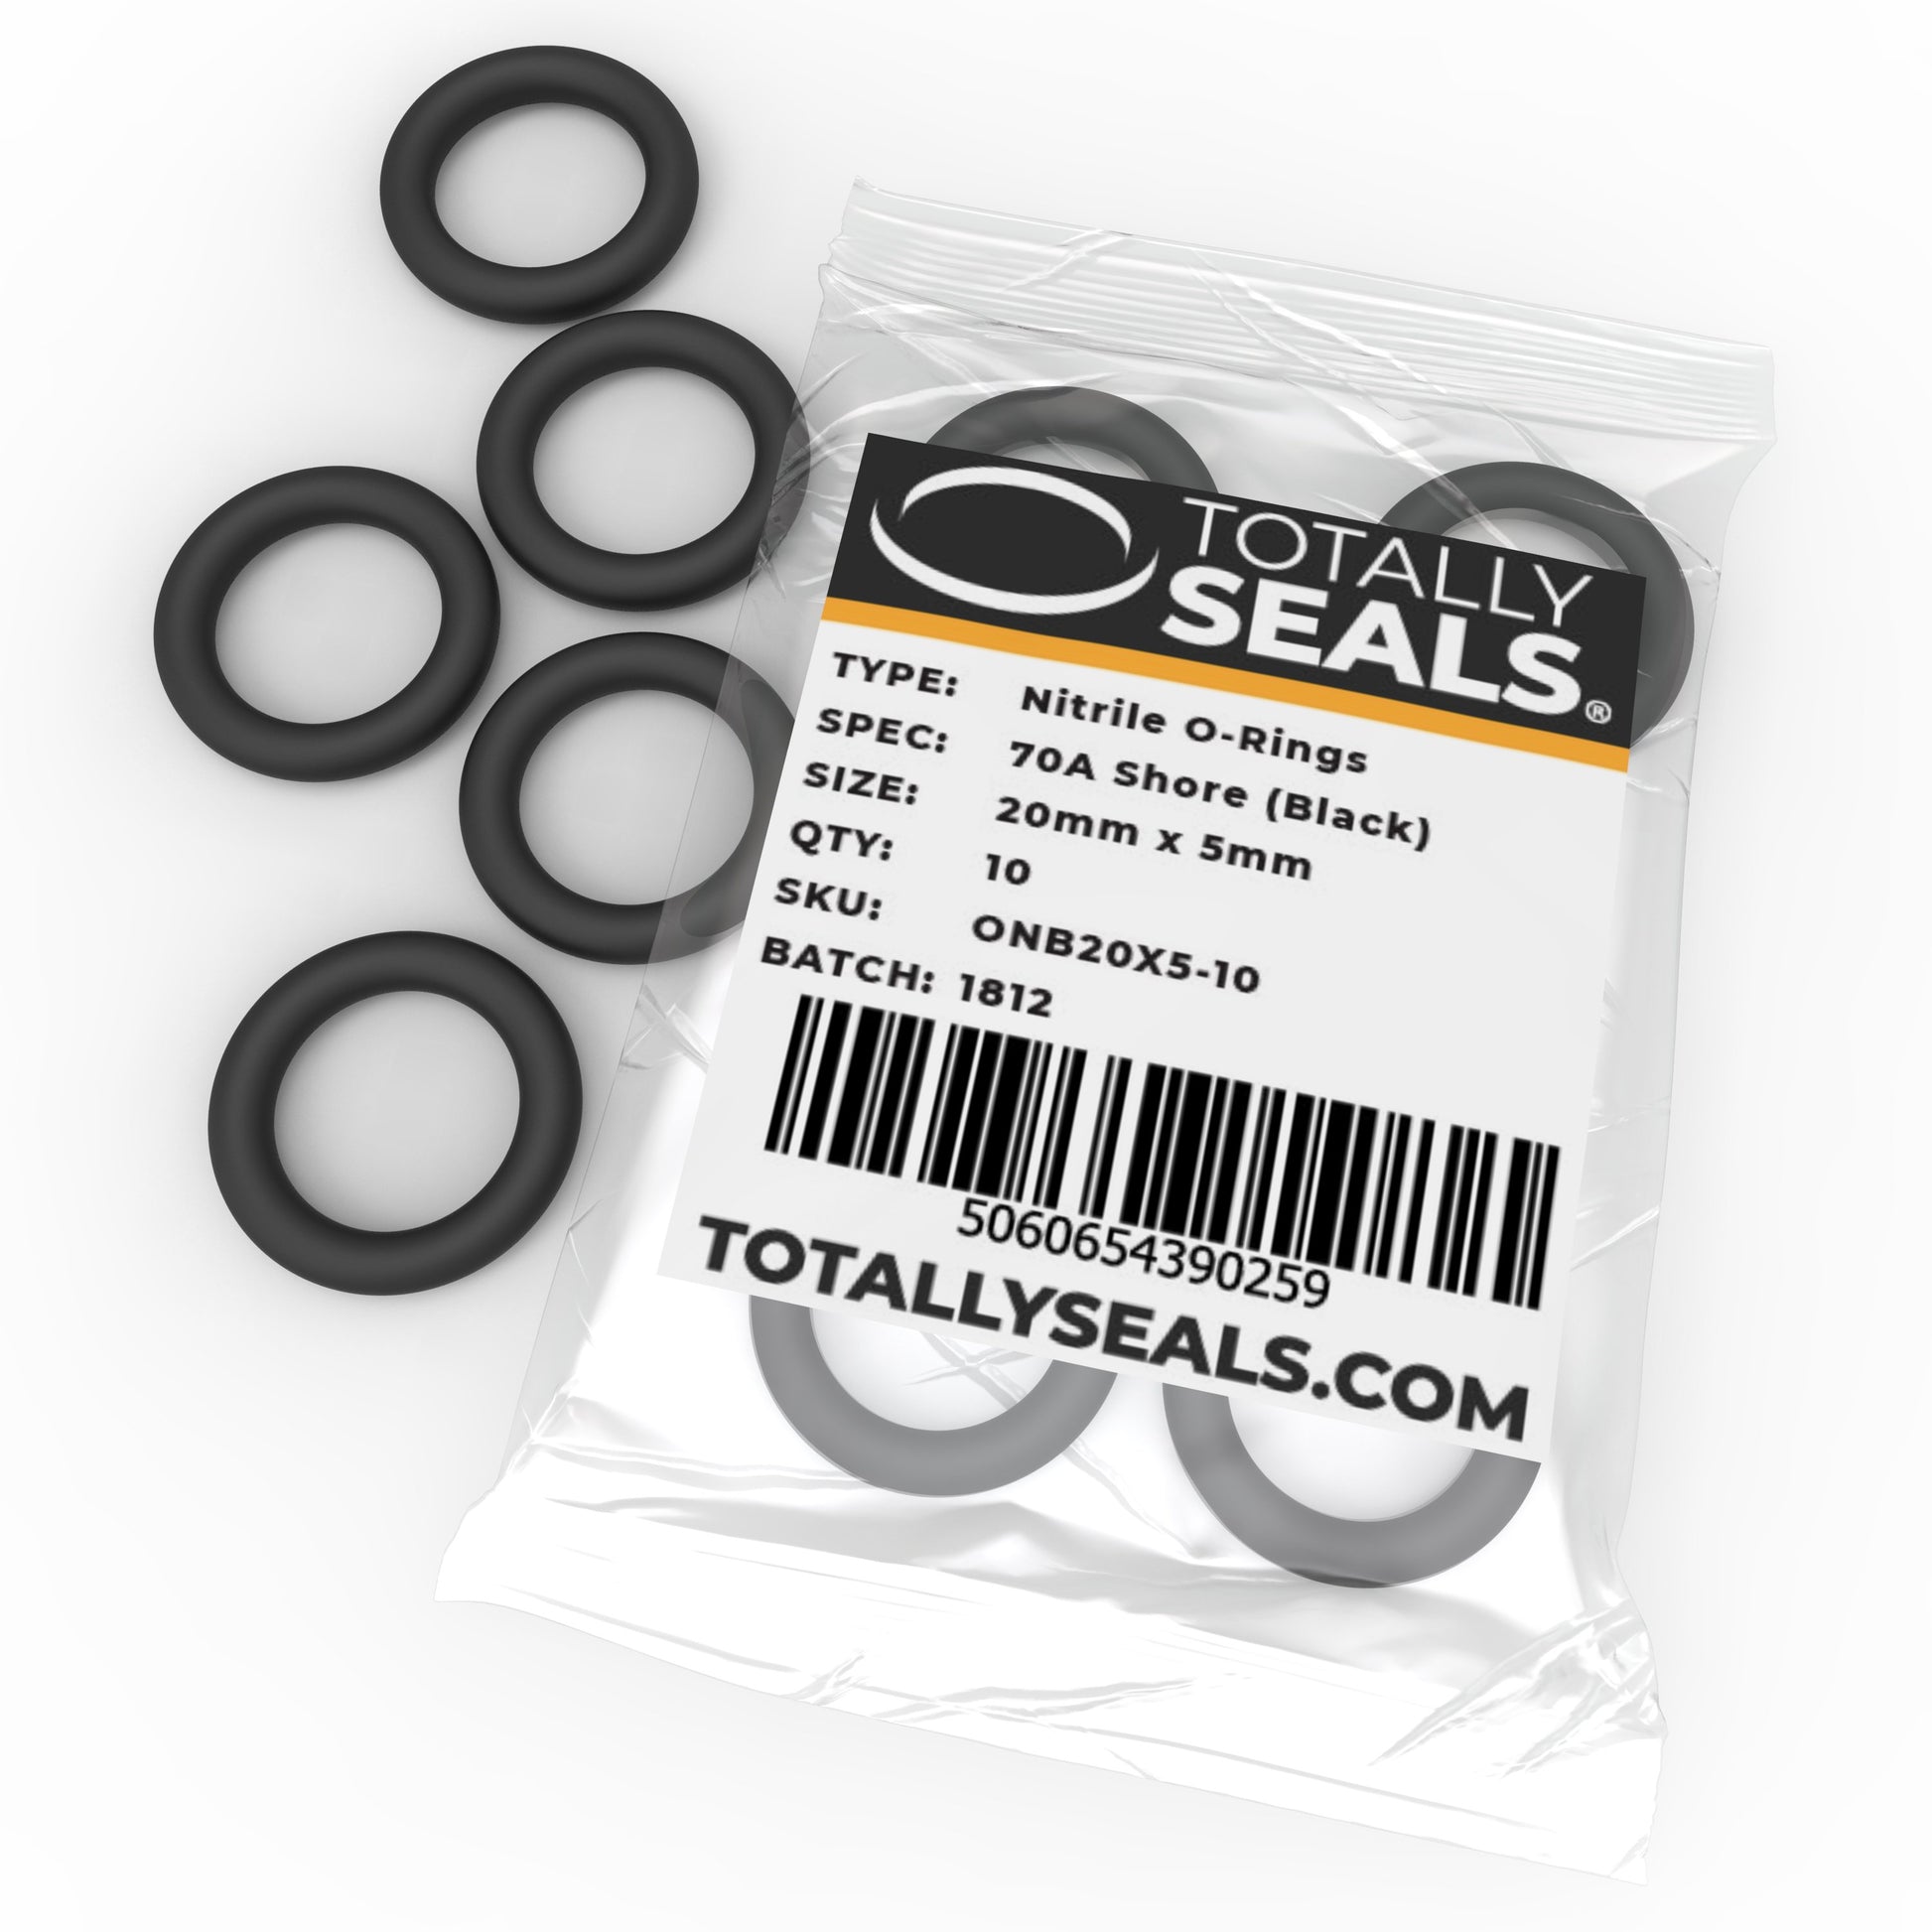 20mm x 5mm (30mm OD) Nitrile O-Rings - Totally Seals®